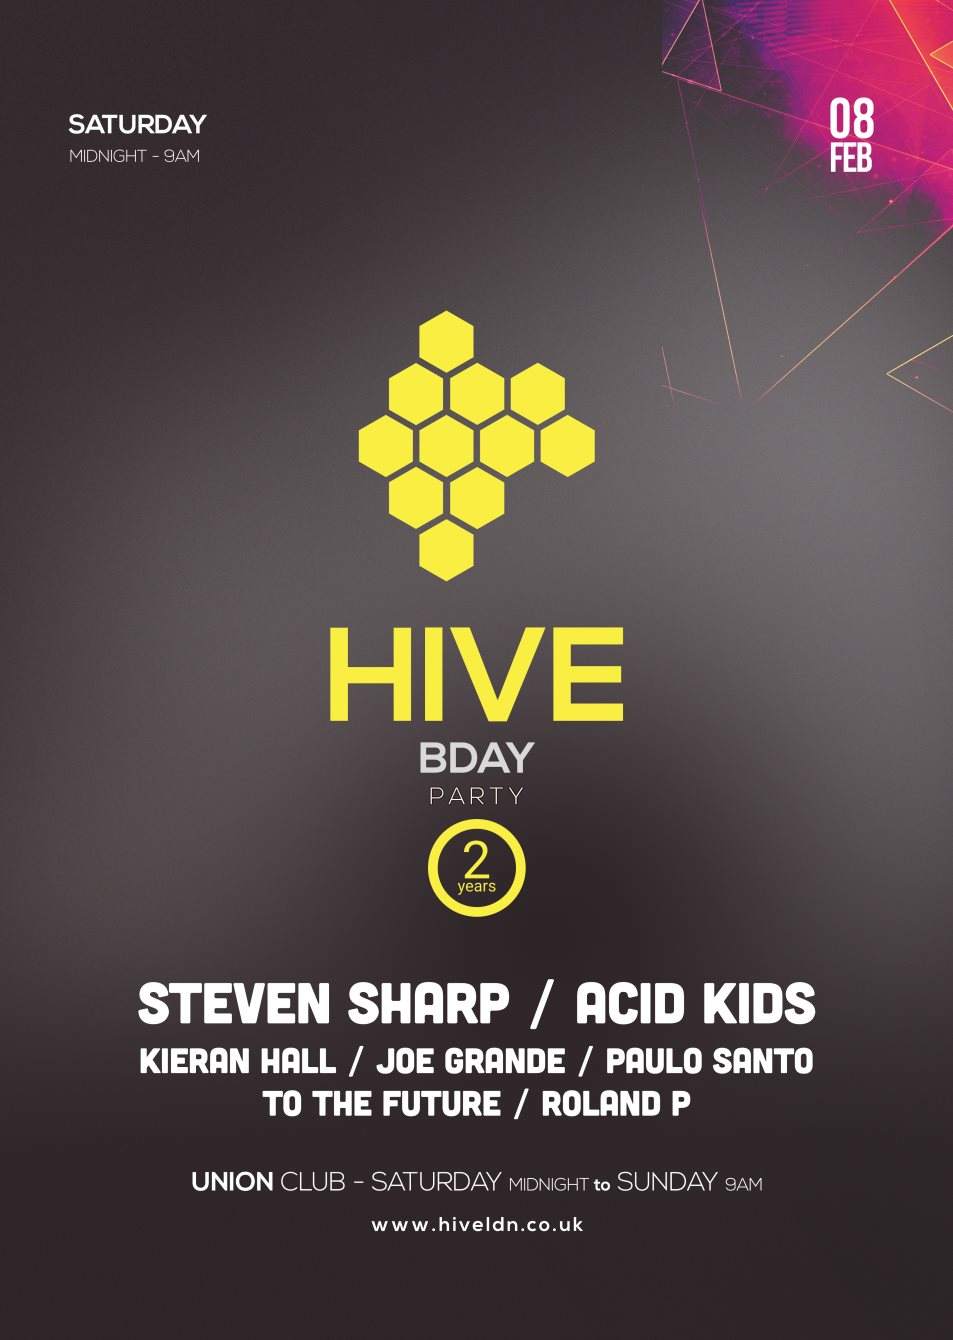 Hive 2nd Bday with Steven Sharp, Acid Kids More - フライヤー裏